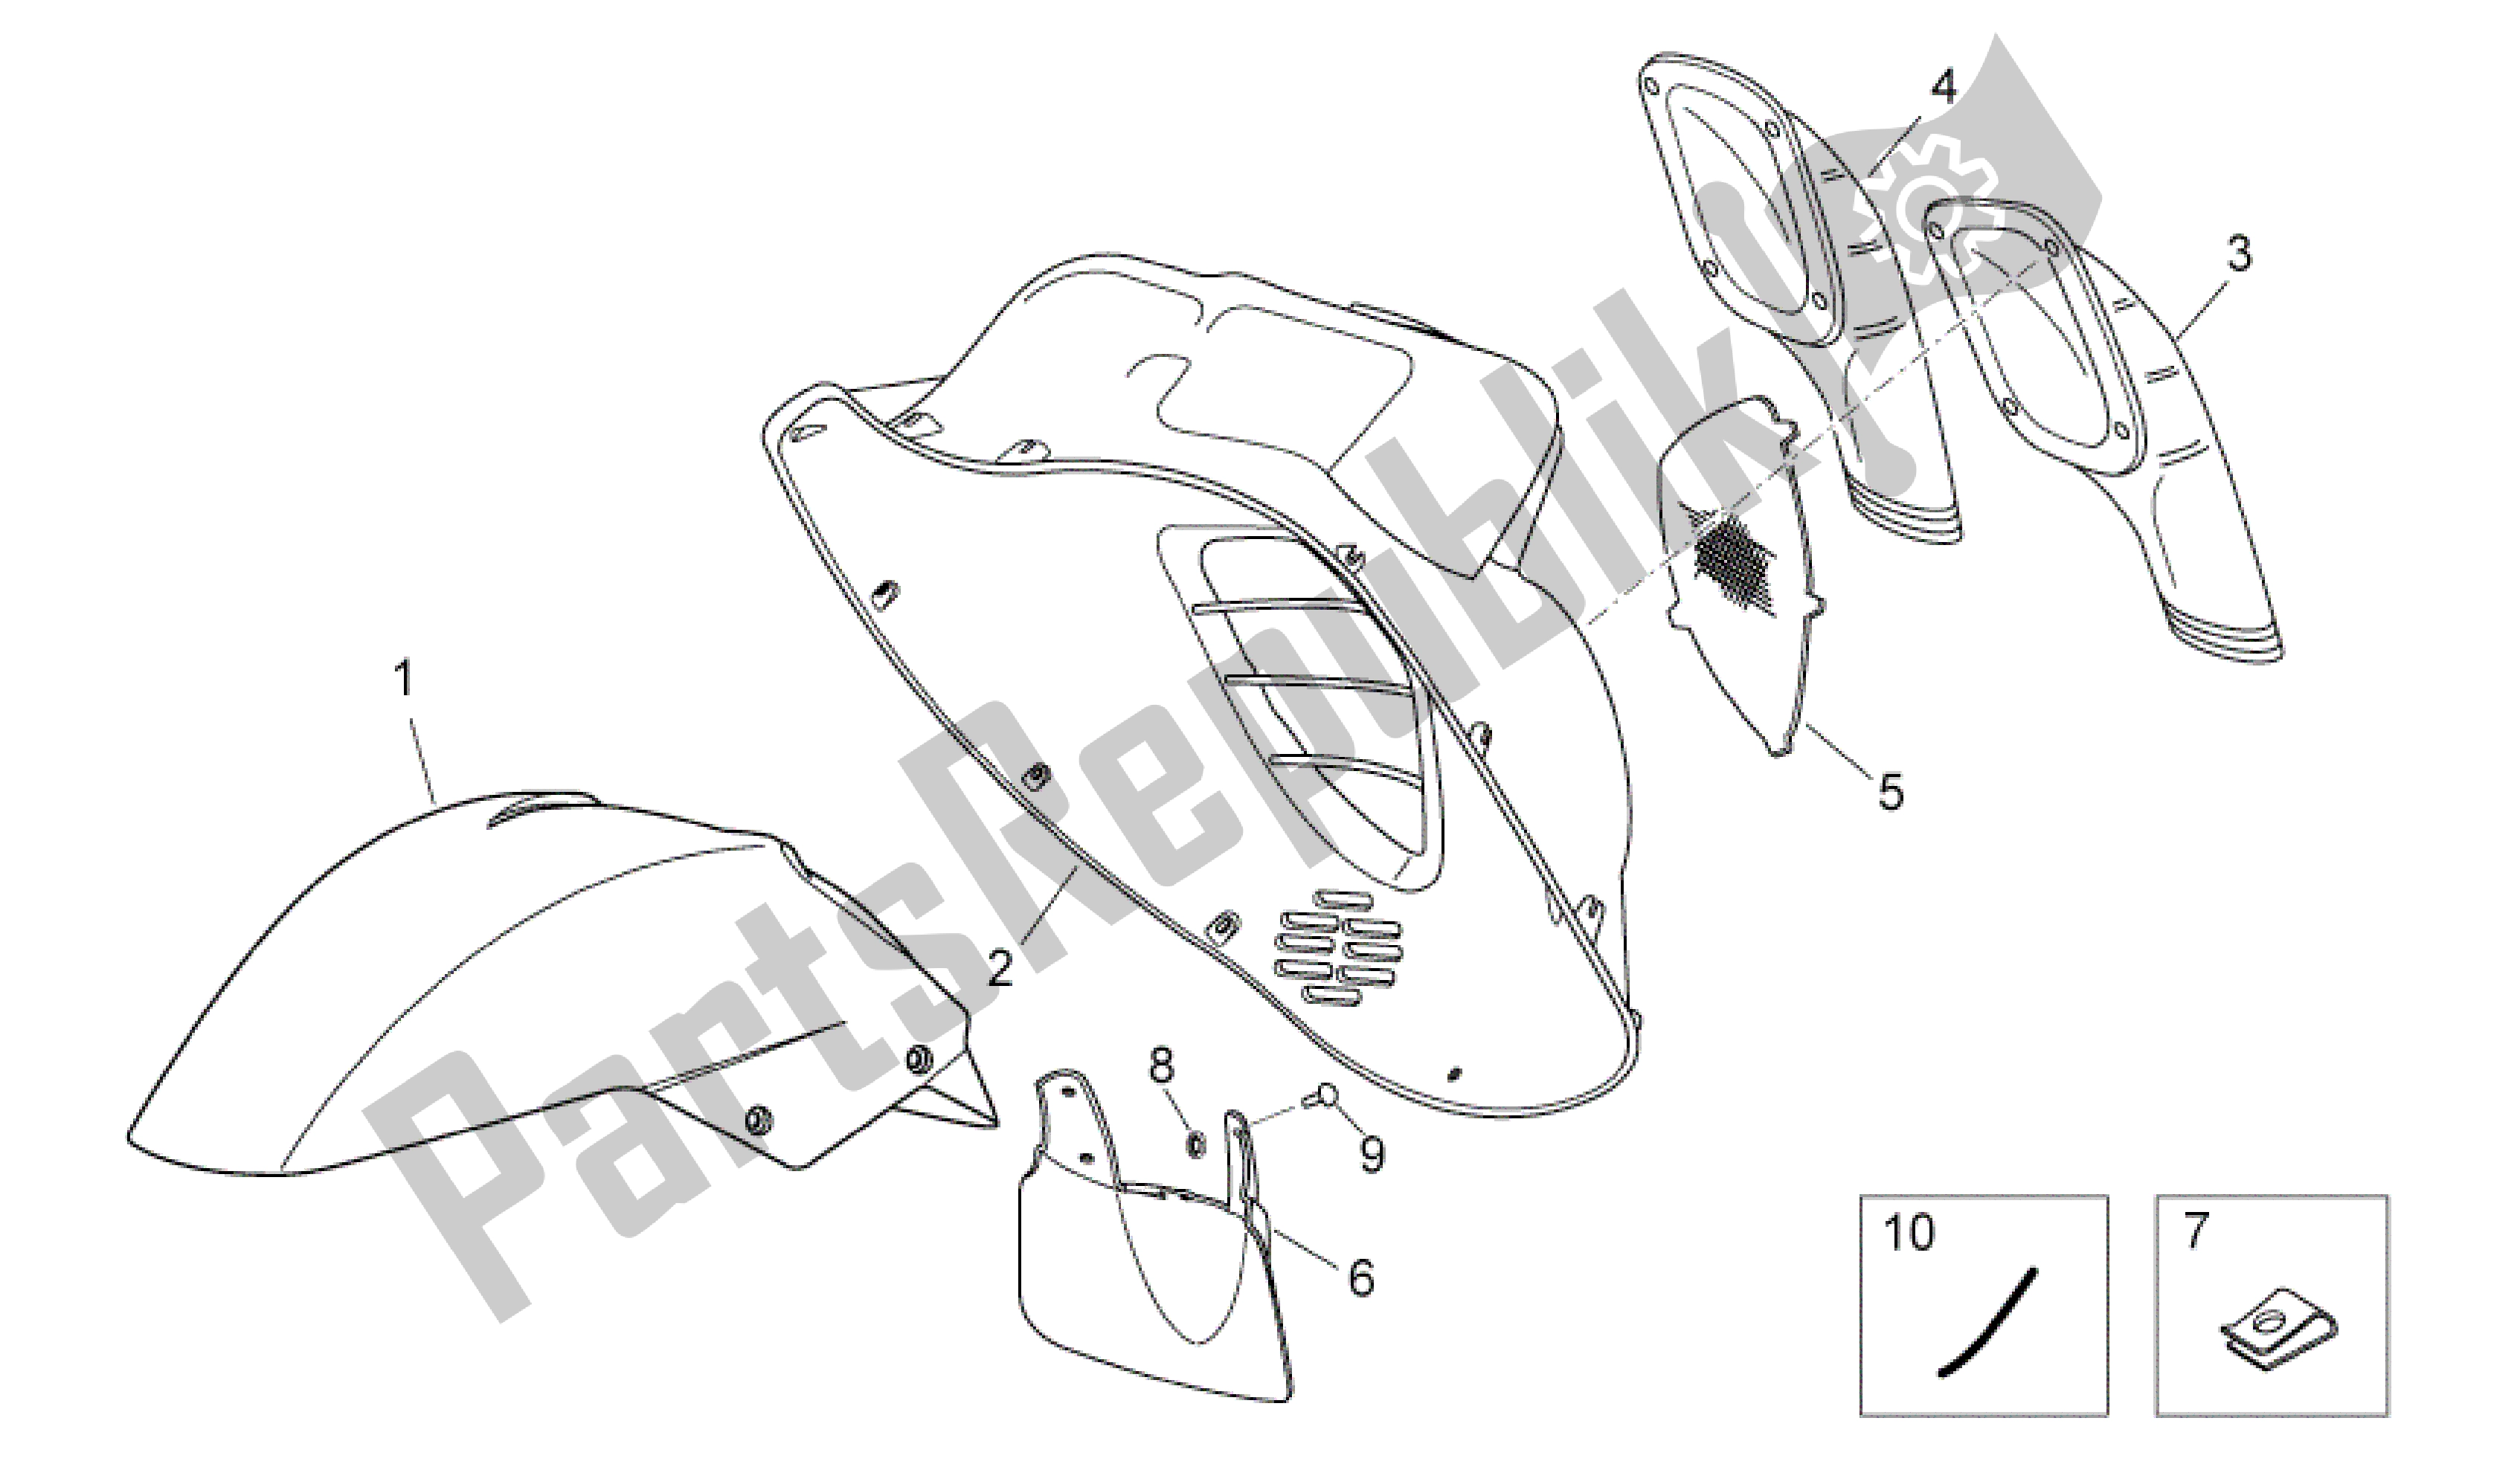 All parts for the Front Body Iii of the Aprilia Atlantic 200 2003 - 2006